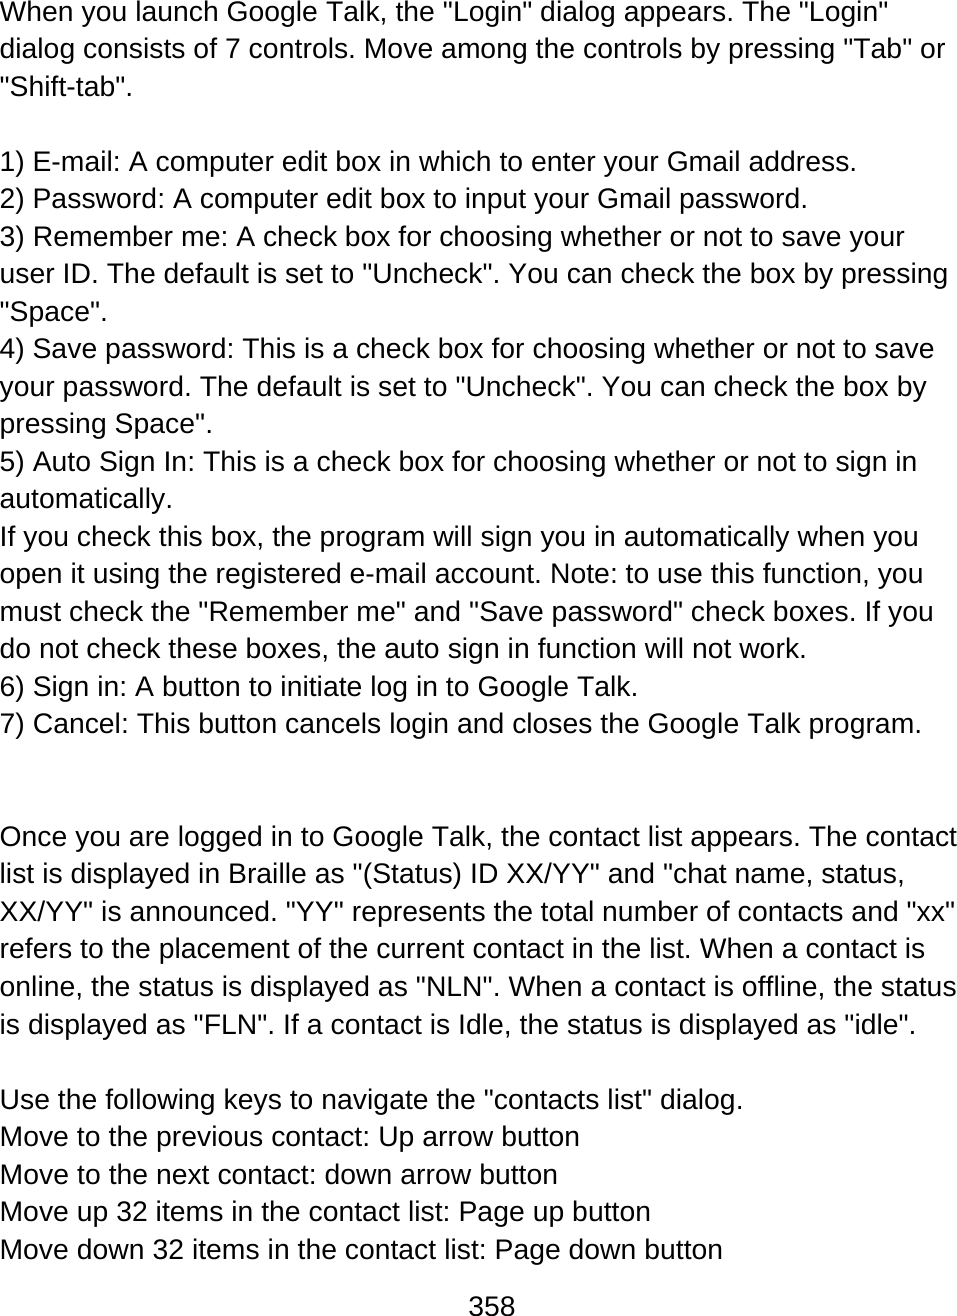 358  When you launch Google Talk, the &quot;Login&quot; dialog appears. The &quot;Login&quot; dialog consists of 7 controls. Move among the controls by pressing &quot;Tab&quot; or &quot;Shift-tab&quot;.  1) E-mail: A computer edit box in which to enter your Gmail address. 2) Password: A computer edit box to input your Gmail password.  3) Remember me: A check box for choosing whether or not to save your user ID. The default is set to &quot;Uncheck&quot;. You can check the box by pressing &quot;Space&quot;. 4) Save password: This is a check box for choosing whether or not to save your password. The default is set to &quot;Uncheck&quot;. You can check the box by pressing Space&quot;.  5) Auto Sign In: This is a check box for choosing whether or not to sign in automatically. If you check this box, the program will sign you in automatically when you open it using the registered e-mail account. Note: to use this function, you must check the &quot;Remember me&quot; and &quot;Save password&quot; check boxes. If you do not check these boxes, the auto sign in function will not work. 6) Sign in: A button to initiate log in to Google Talk.  7) Cancel: This button cancels login and closes the Google Talk program.    Once you are logged in to Google Talk, the contact list appears. The contact list is displayed in Braille as &quot;(Status) ID XX/YY&quot; and &quot;chat name, status, XX/YY&quot; is announced. &quot;YY&quot; represents the total number of contacts and &quot;xx&quot; refers to the placement of the current contact in the list. When a contact is online, the status is displayed as &quot;NLN&quot;. When a contact is offline, the status is displayed as &quot;FLN&quot;. If a contact is Idle, the status is displayed as &quot;idle&quot;.   Use the following keys to navigate the &quot;contacts list&quot; dialog. Move to the previous contact: Up arrow button  Move to the next contact: down arrow button Move up 32 items in the contact list: Page up button Move down 32 items in the contact list: Page down button 